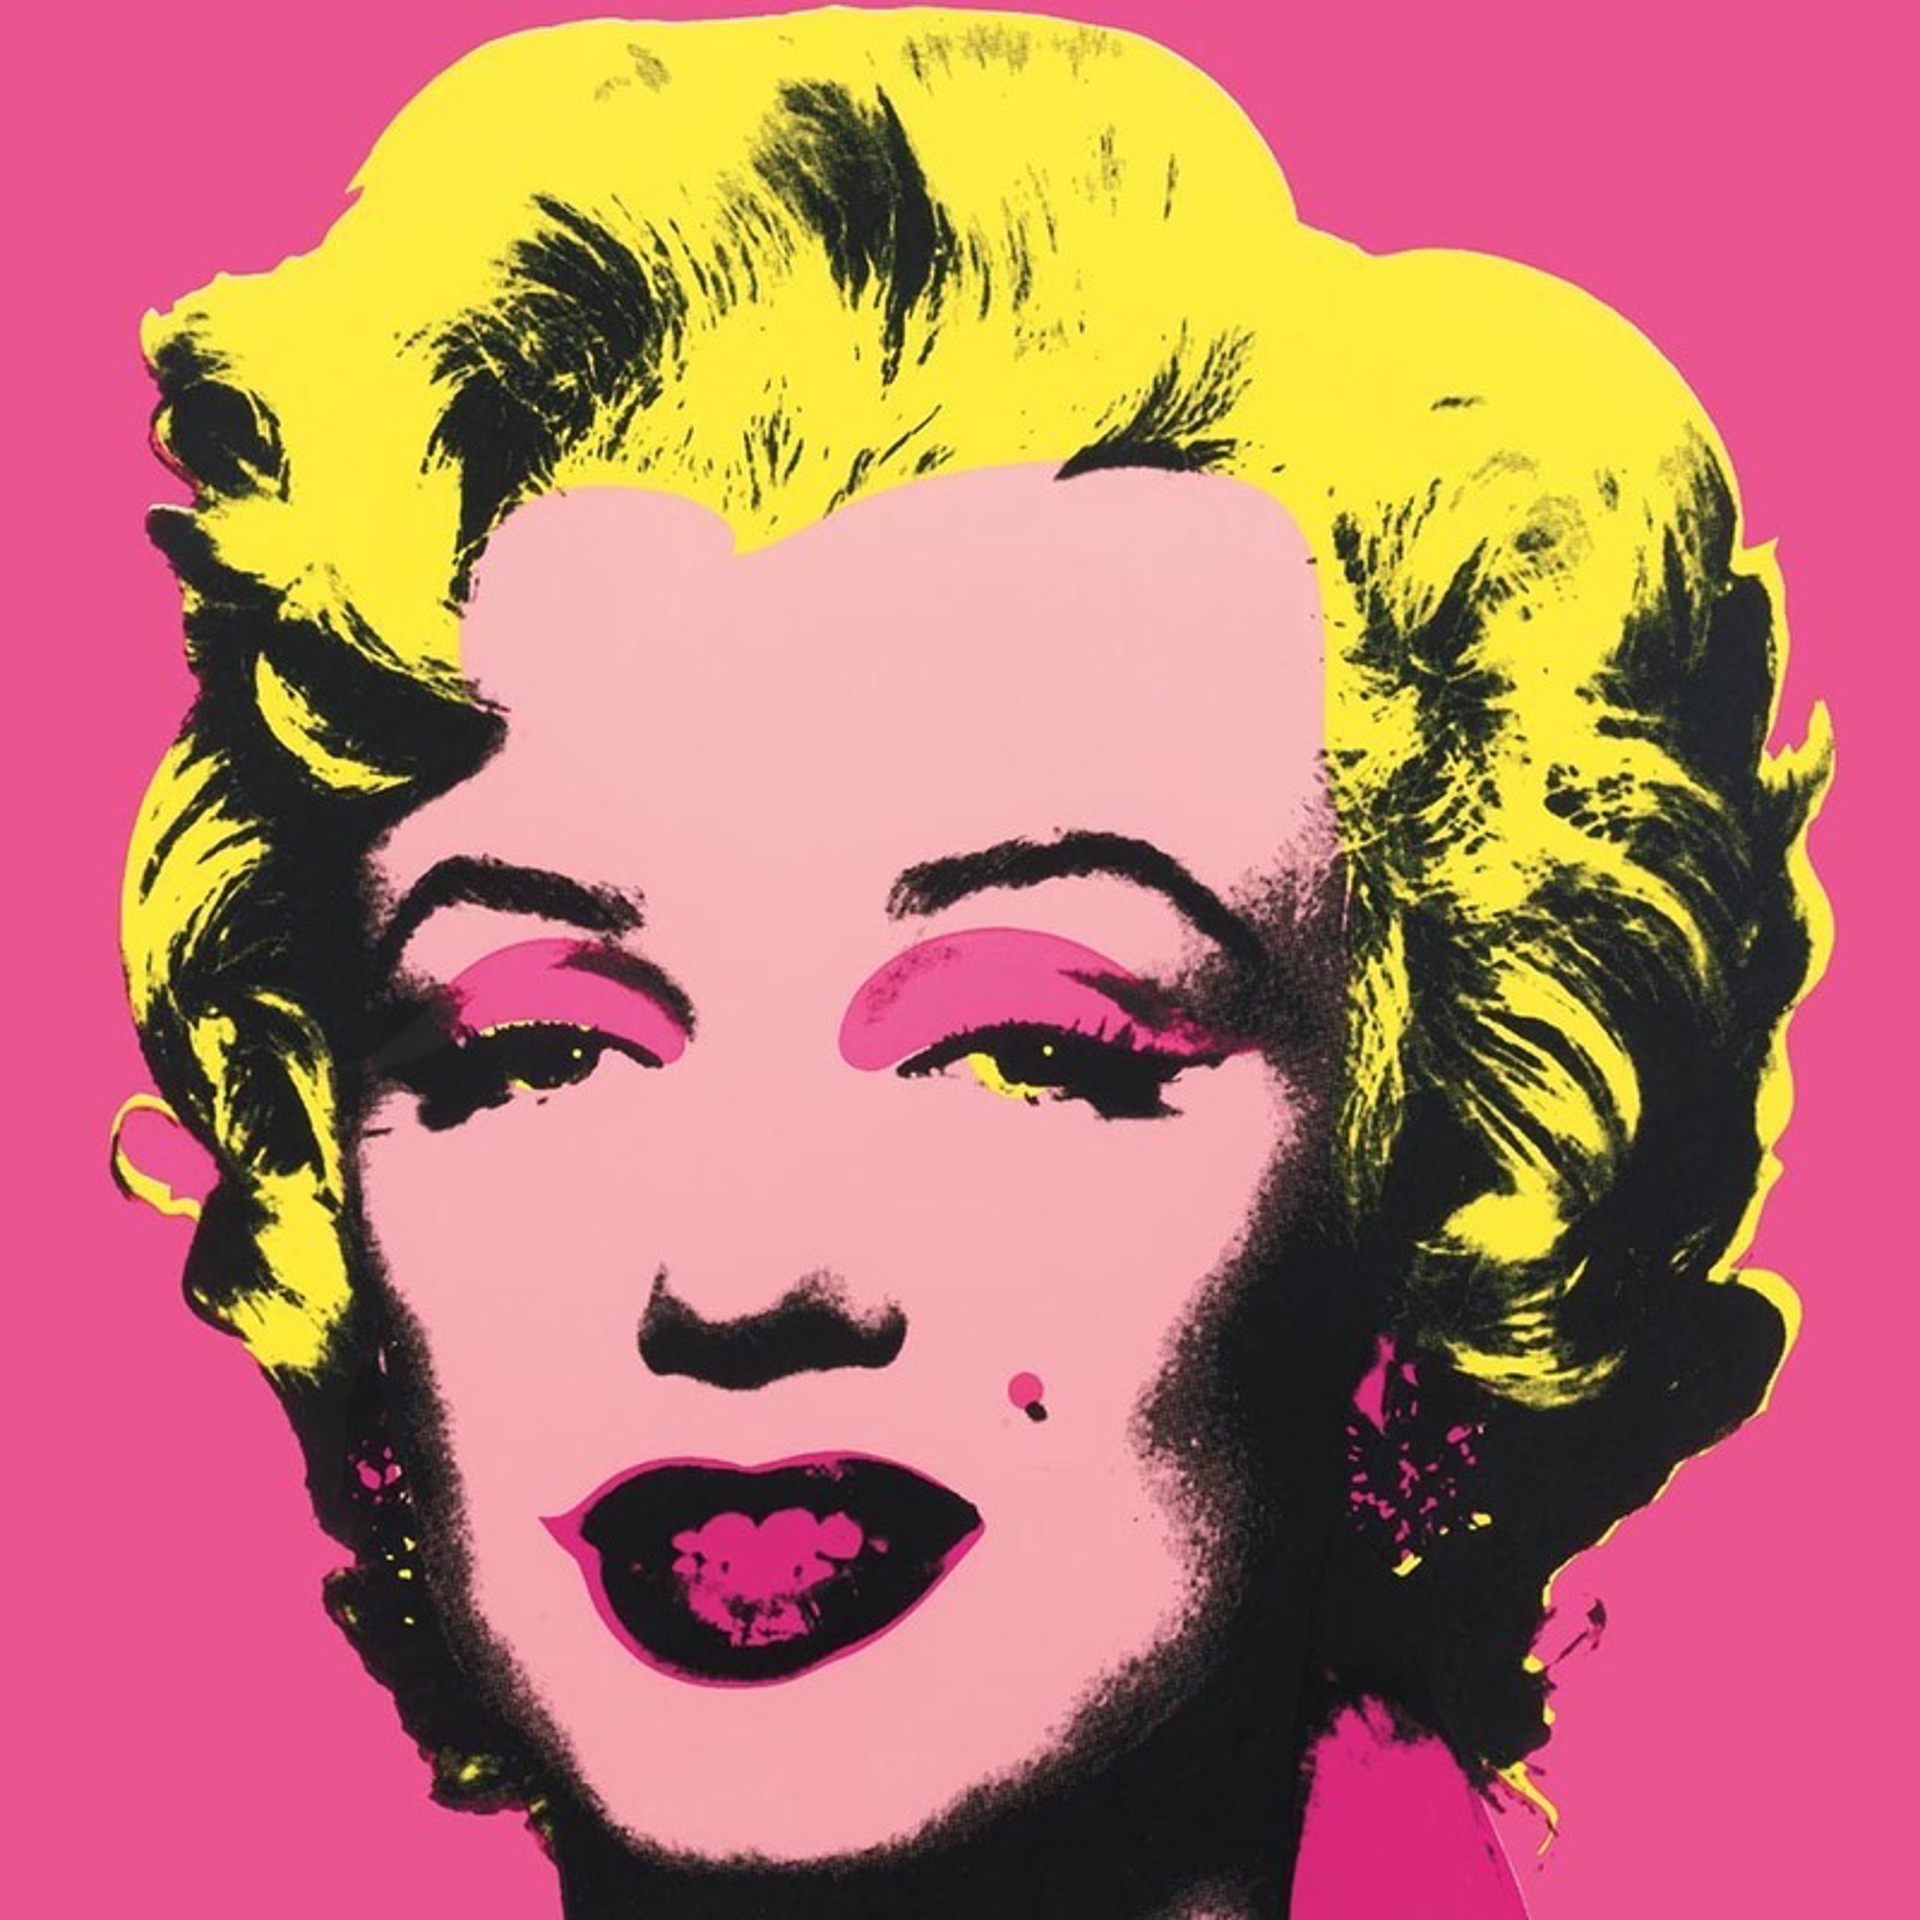 Marilyn 31 From the Sunday B. Morning Edition by Andy Warhol (1928 - 1987)